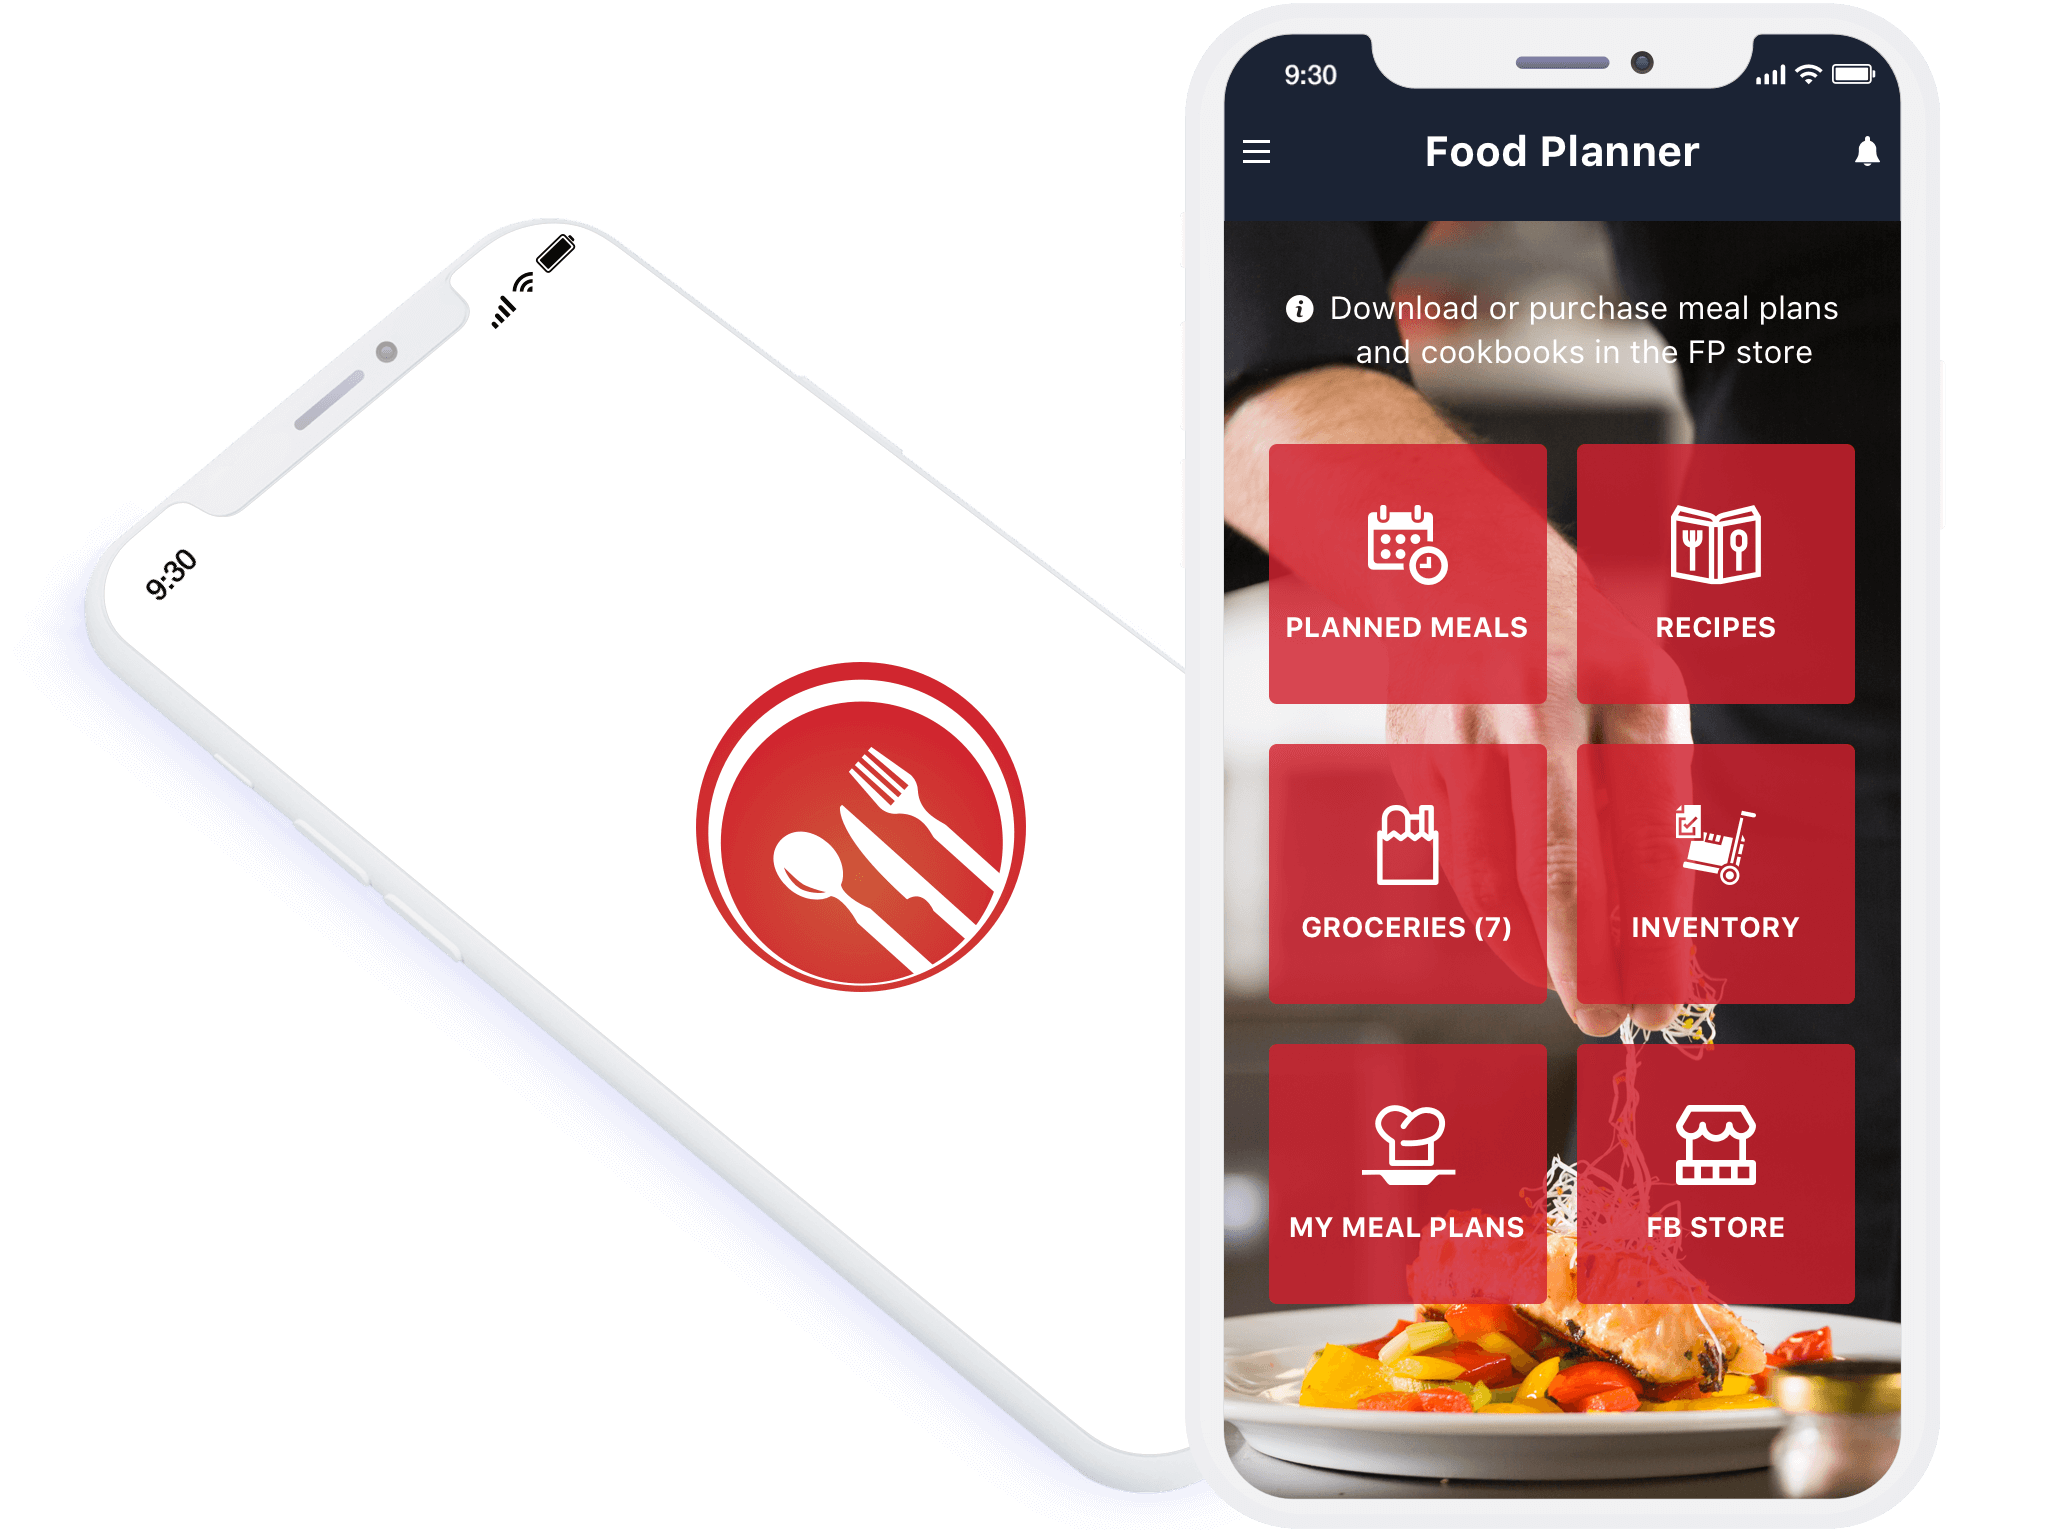 How Much Does It Cost To Develop A Meal Planner App Like Food Planner